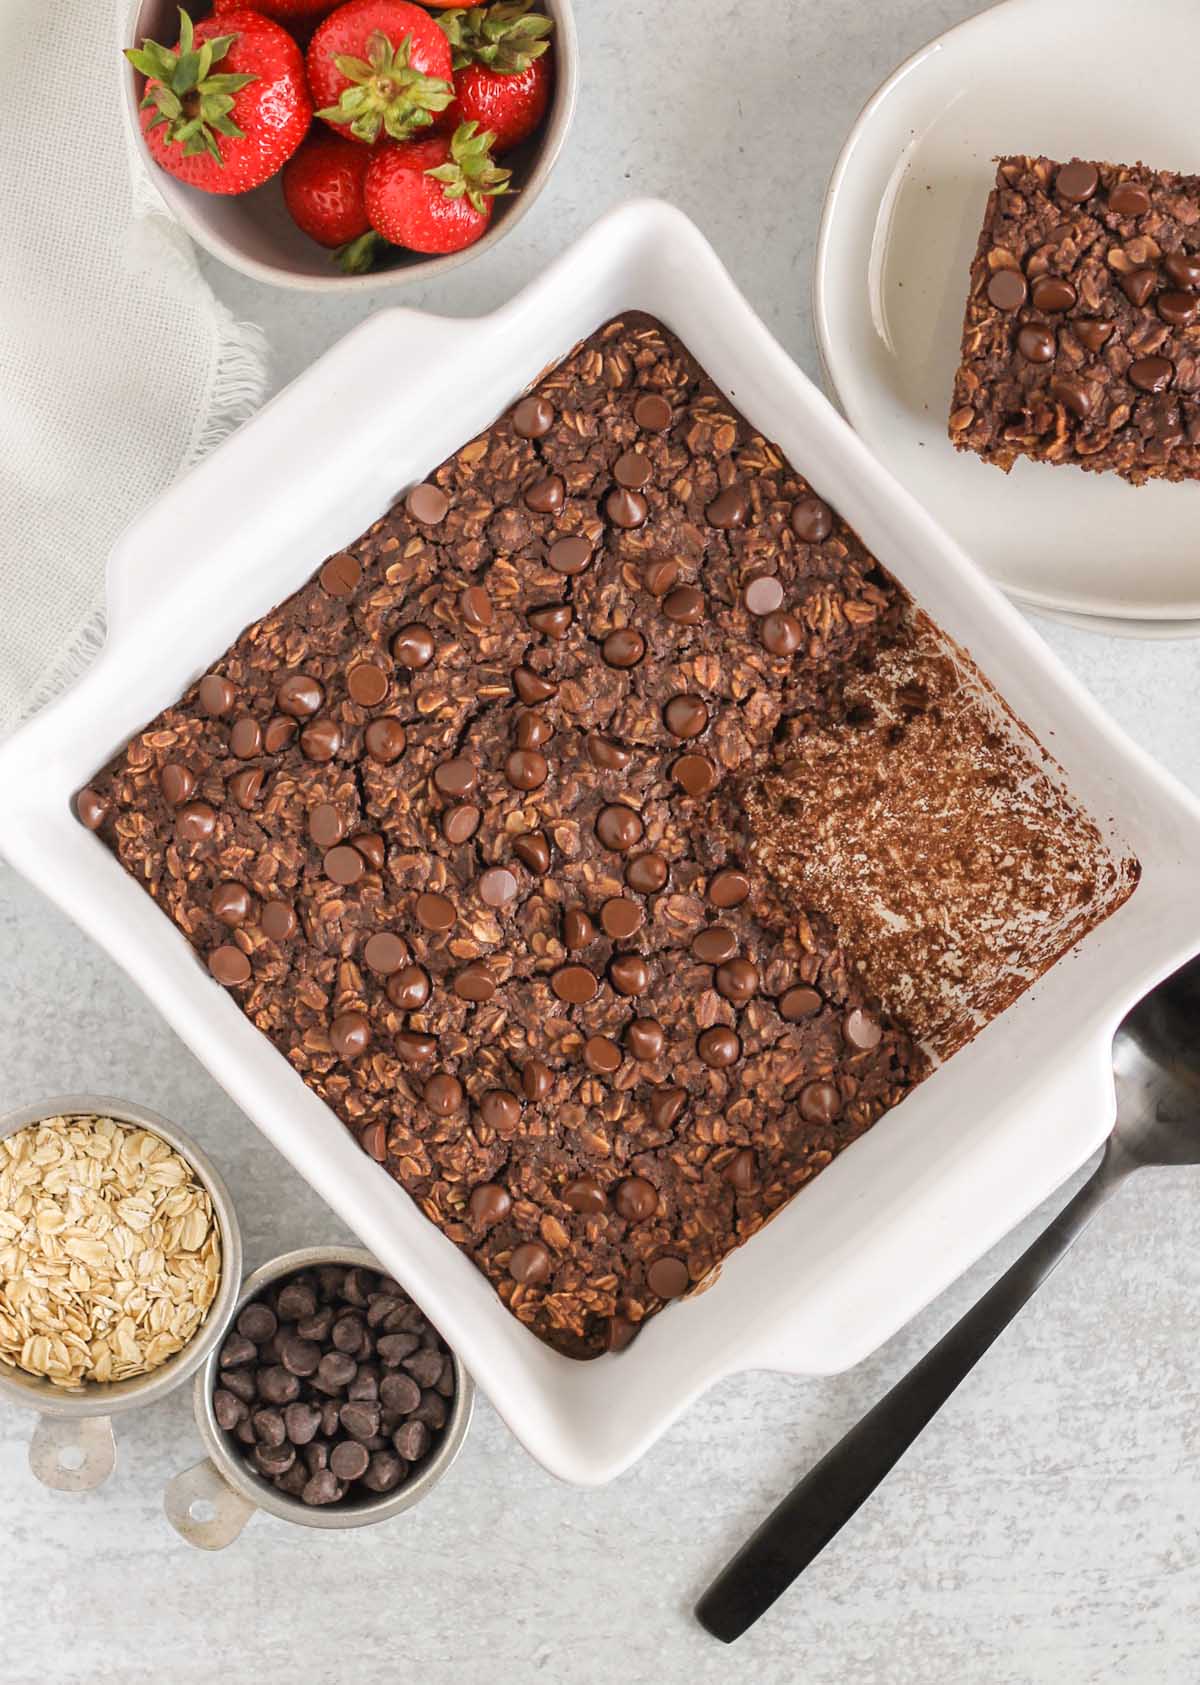 chocolate baked oats in a baking dish with a square piece cut out of the oats.